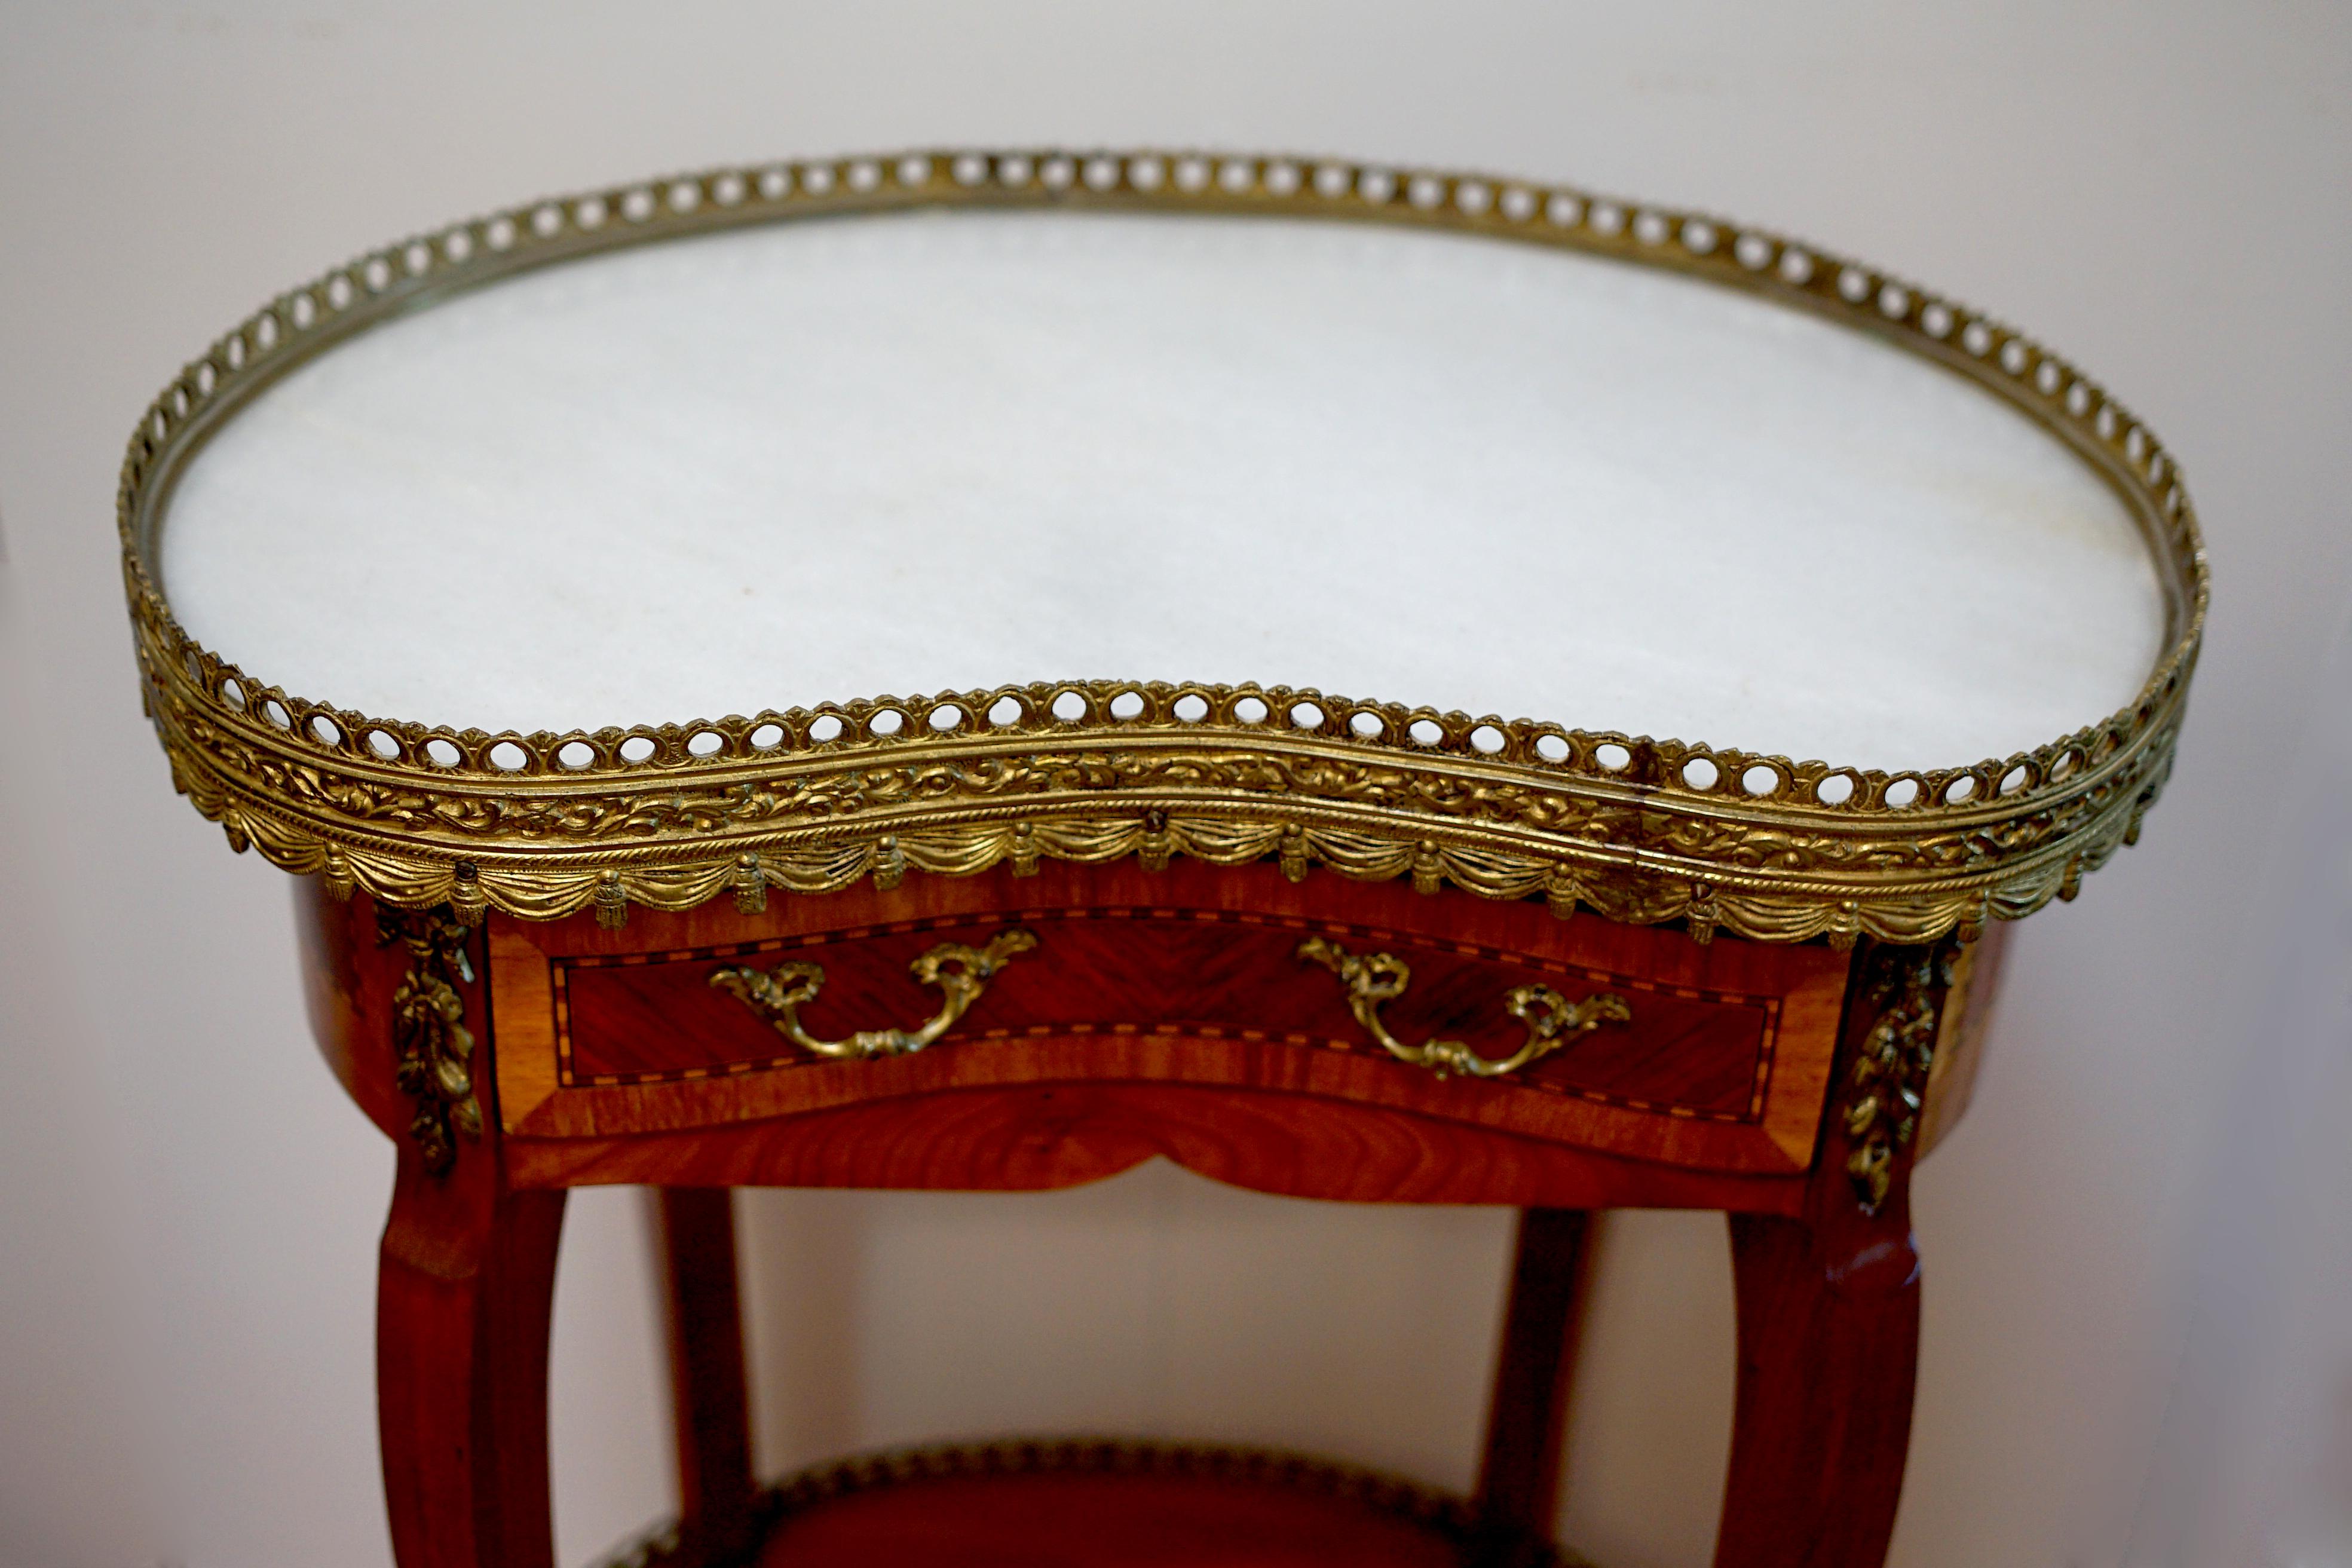 Rococo Revival Antique Spanish Rococo Style  Table, Marquetry  Gilt Metal Mounted Kidney-Shape